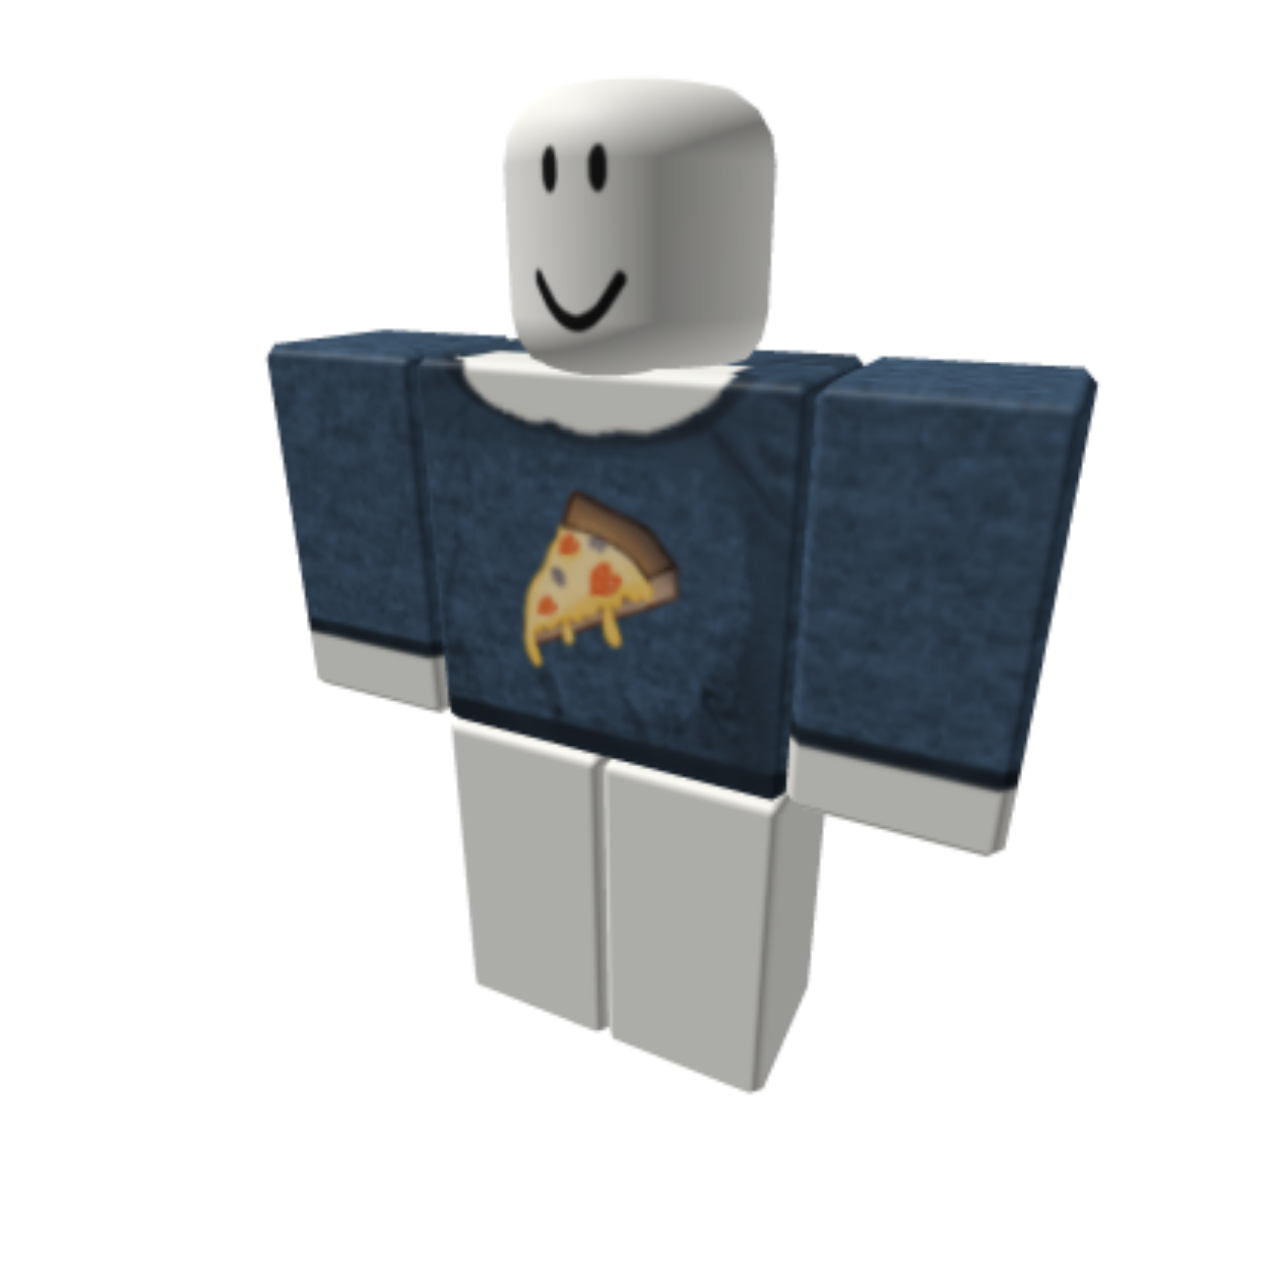 Roblox Custom Outfits